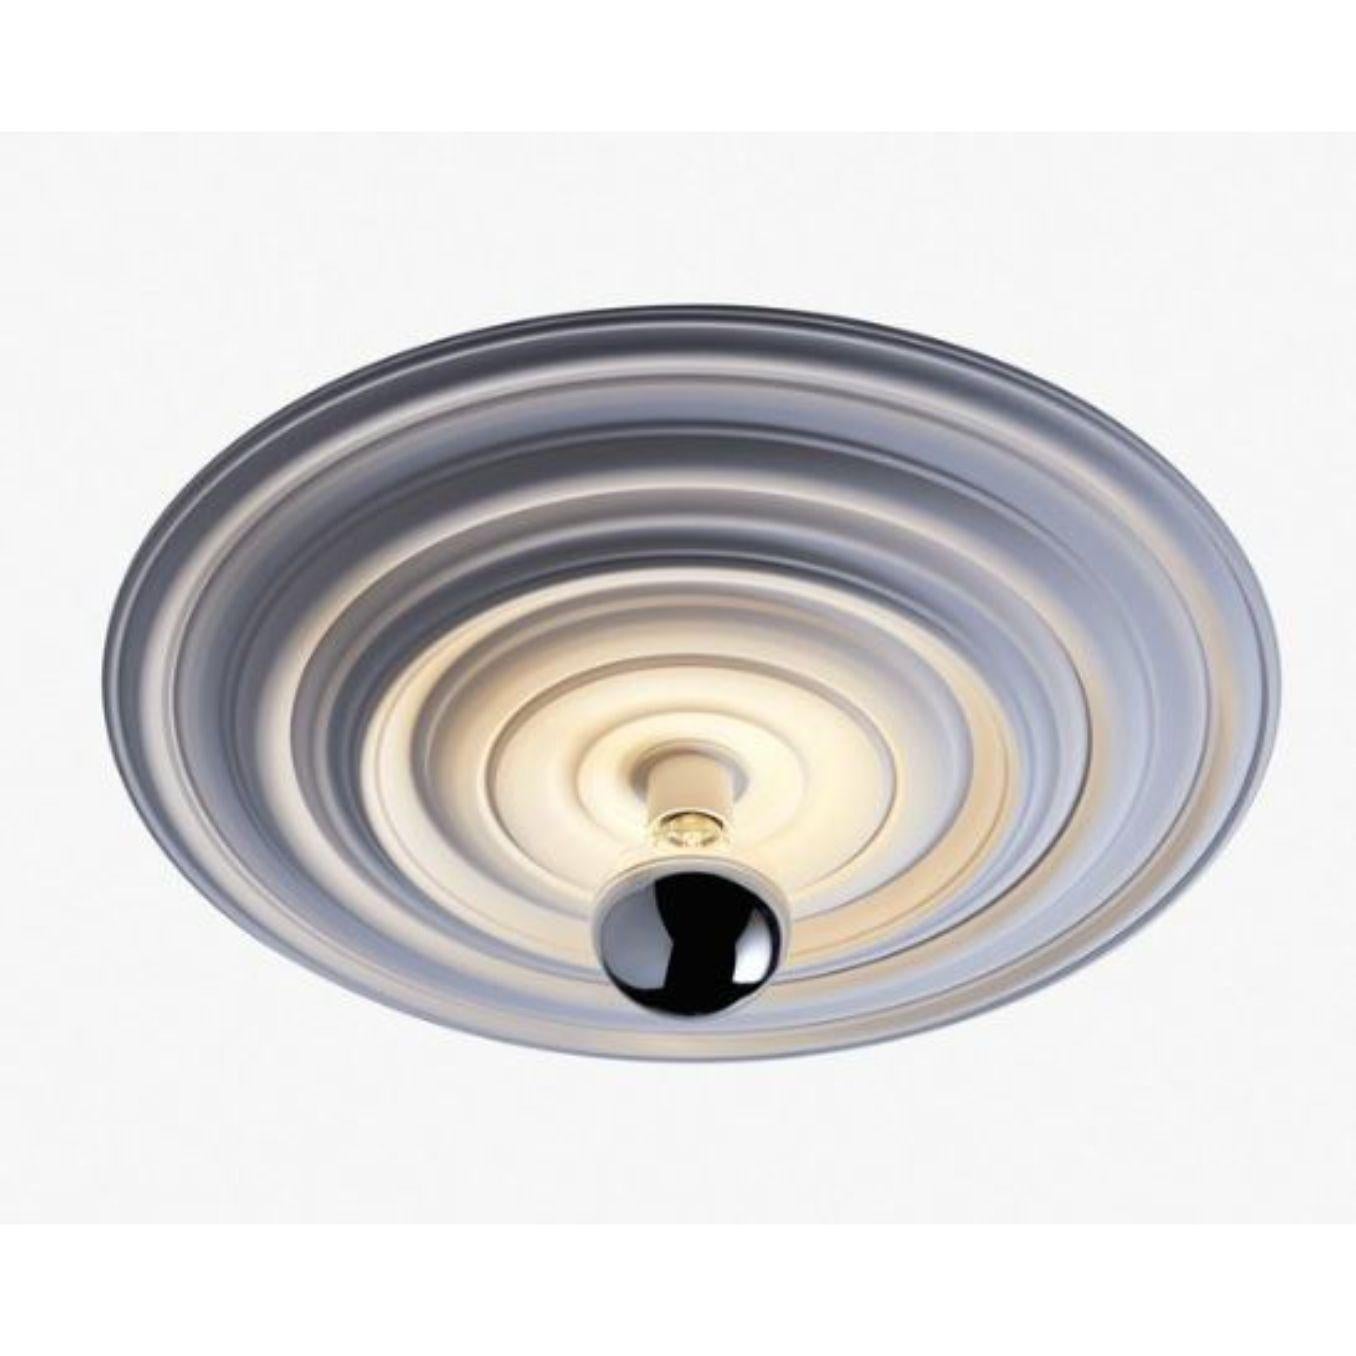 Small Odeon ceiling light by RADAR.
Design: Bastien Taillard.
Materials: Metal, Plaster of Paris, fiberglass.
Dimensions: W 46 x D 46 x H 15 cm
Also Available with a double layer of mat white paint or in raw plaster ready to paint. Bulb socket